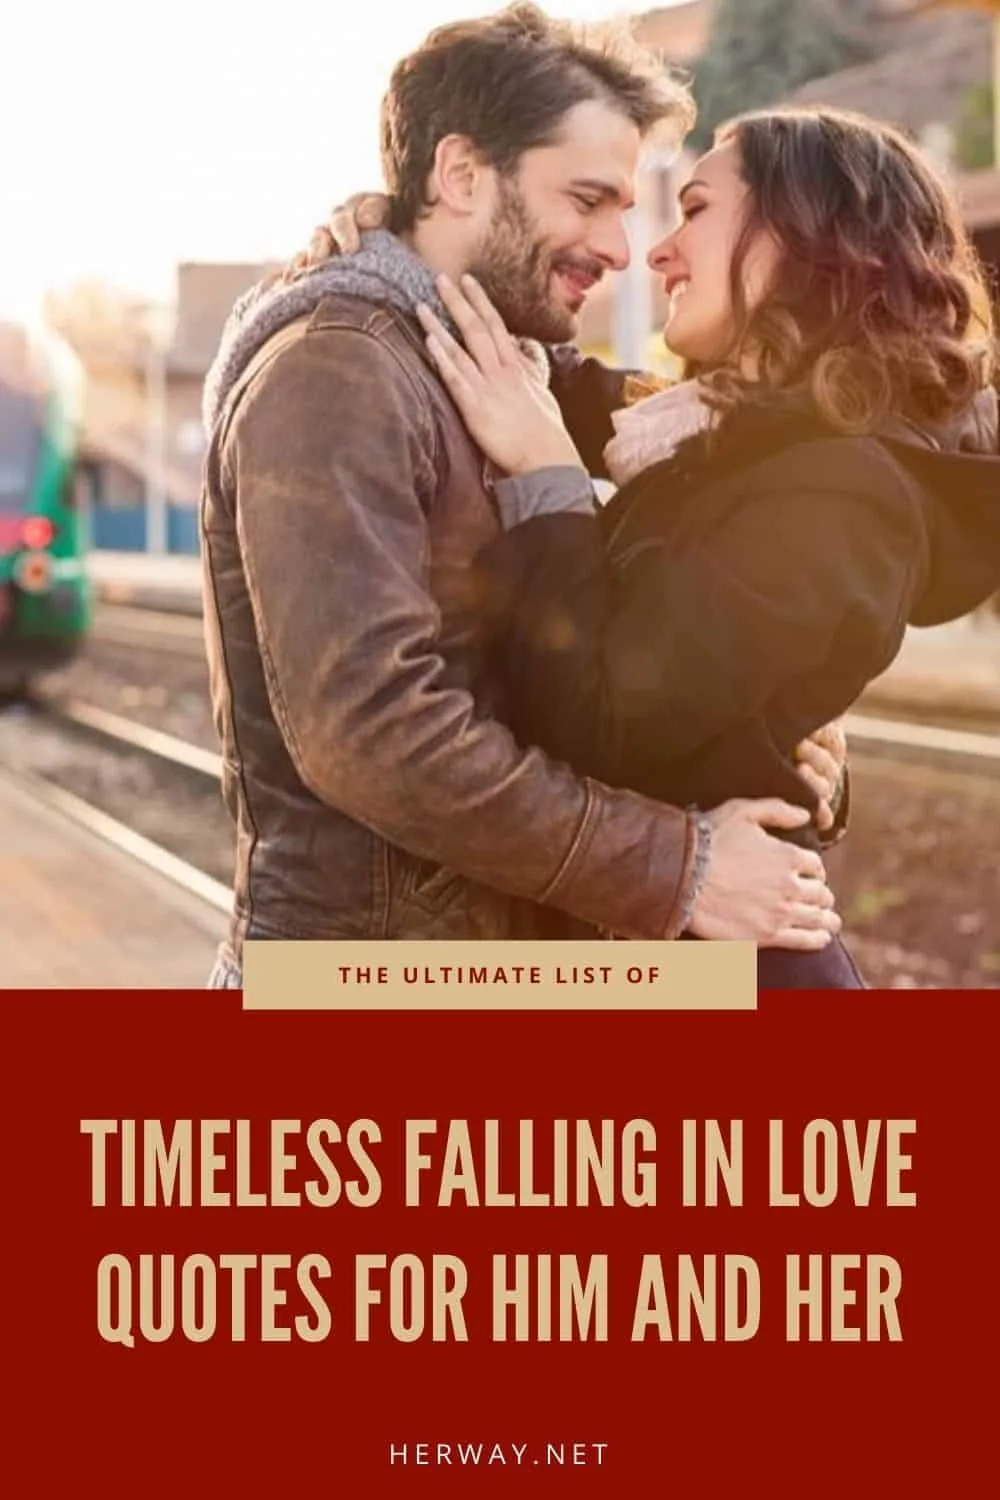 The Ultimate List Of Timeless Falling In Love Quotes For Him And Her